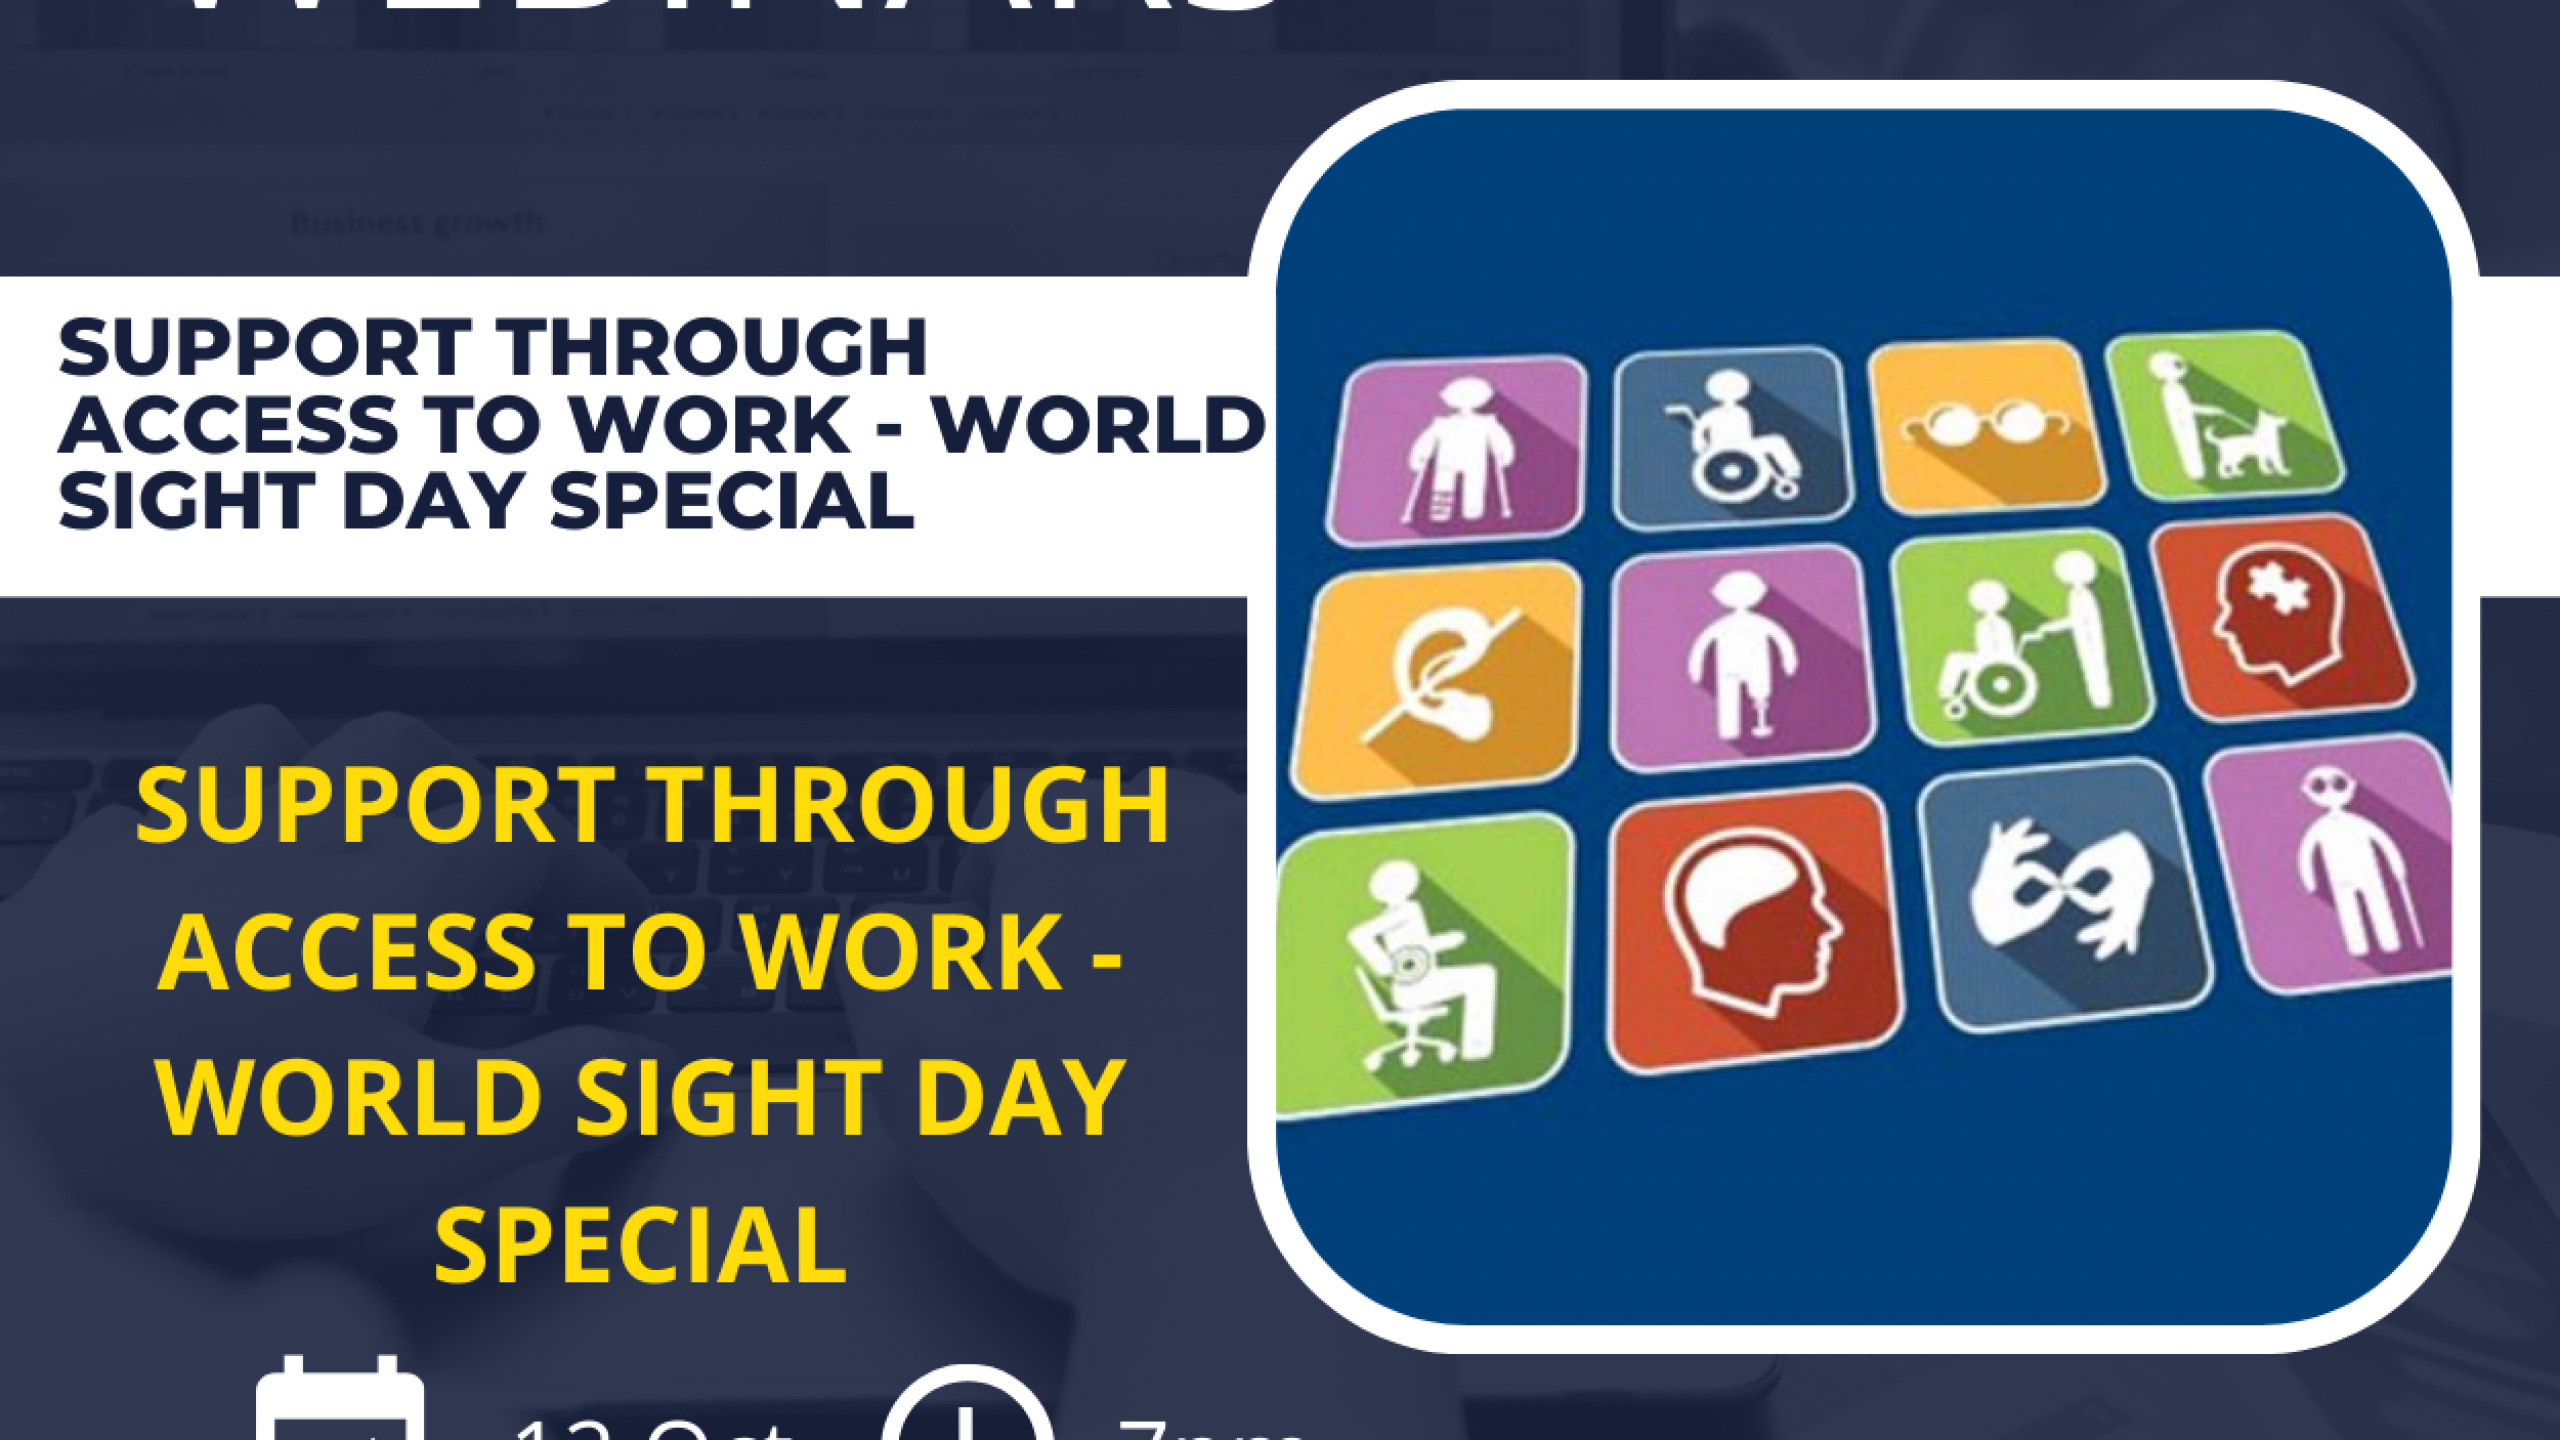 A square image with a blue background promoting the Access to Work webinar on 12 October